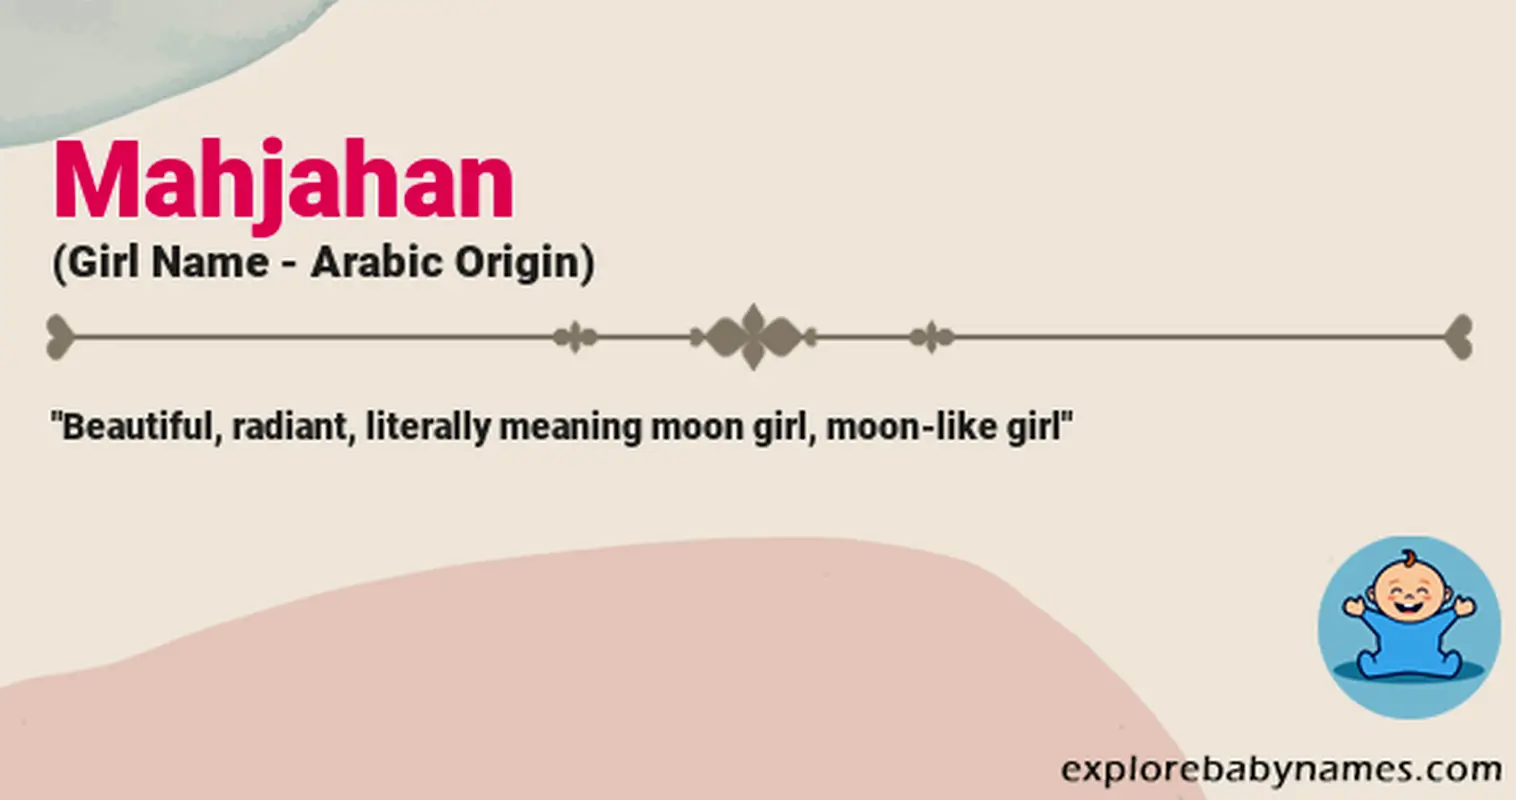 Meaning of Mahjahan